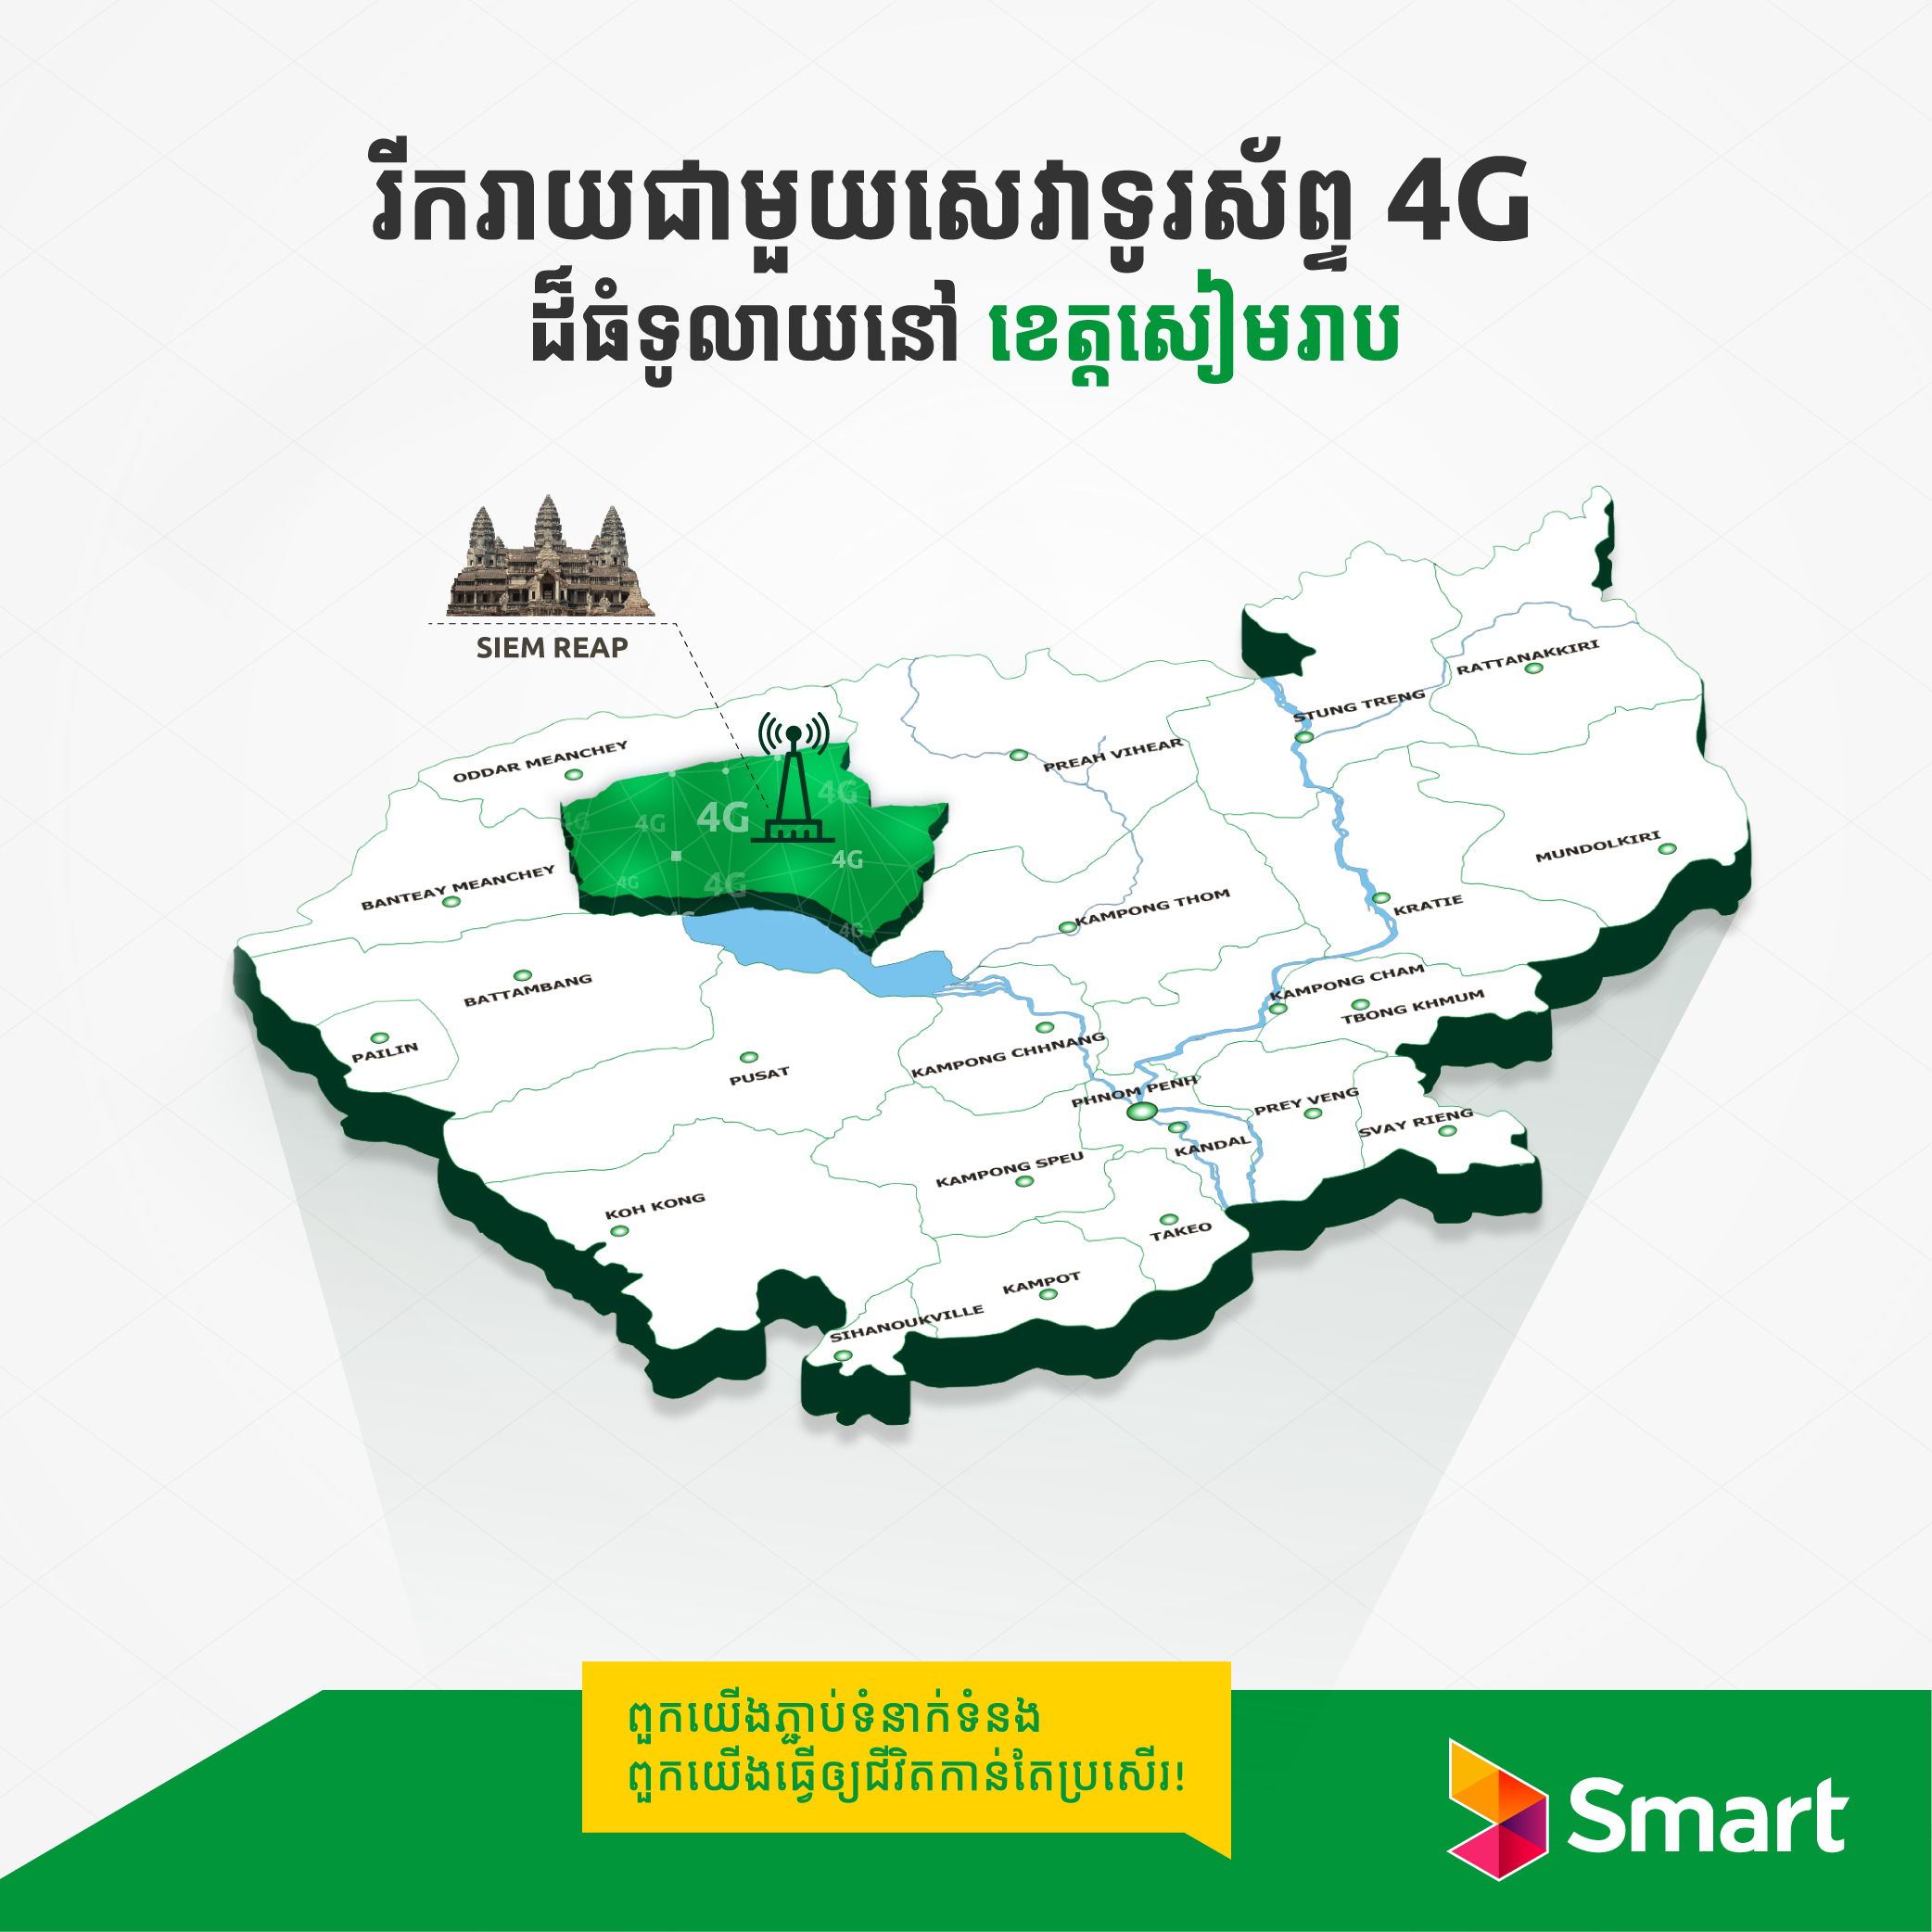 62 New Network Sites In SR